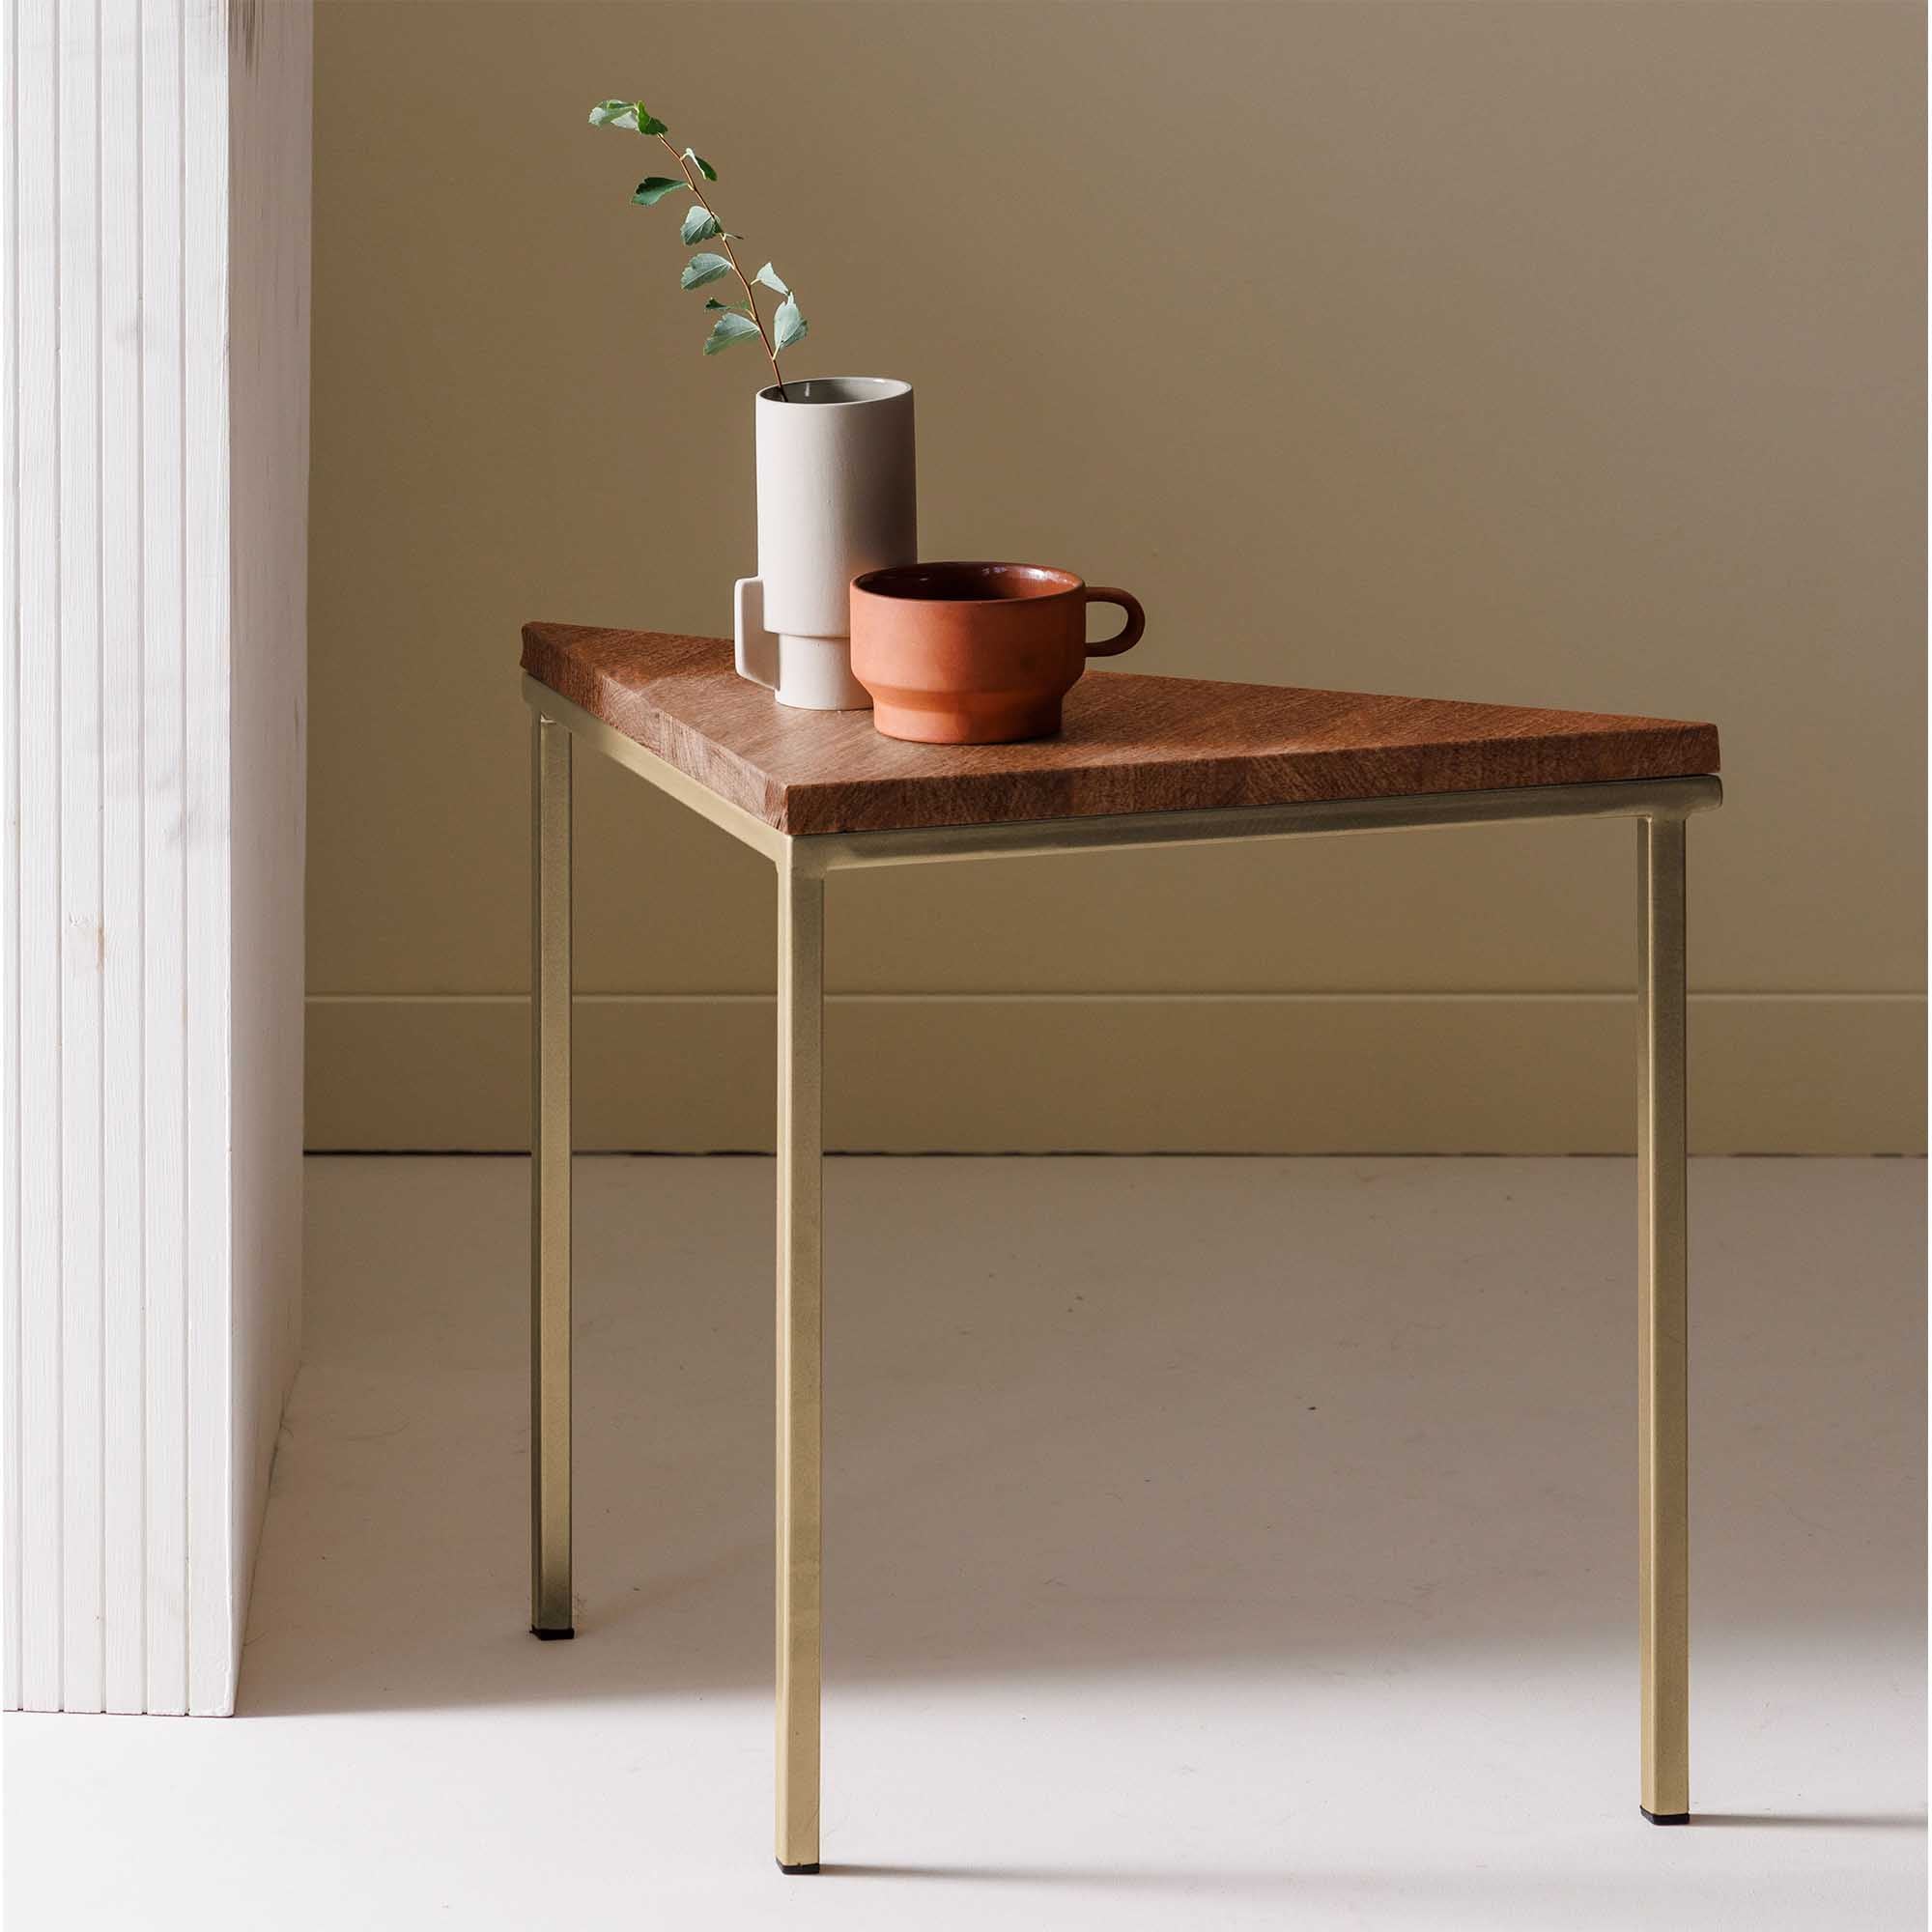 Tripod Table, Beech Wood, Walnut Colour yellow frame, interior side view with vase and mug